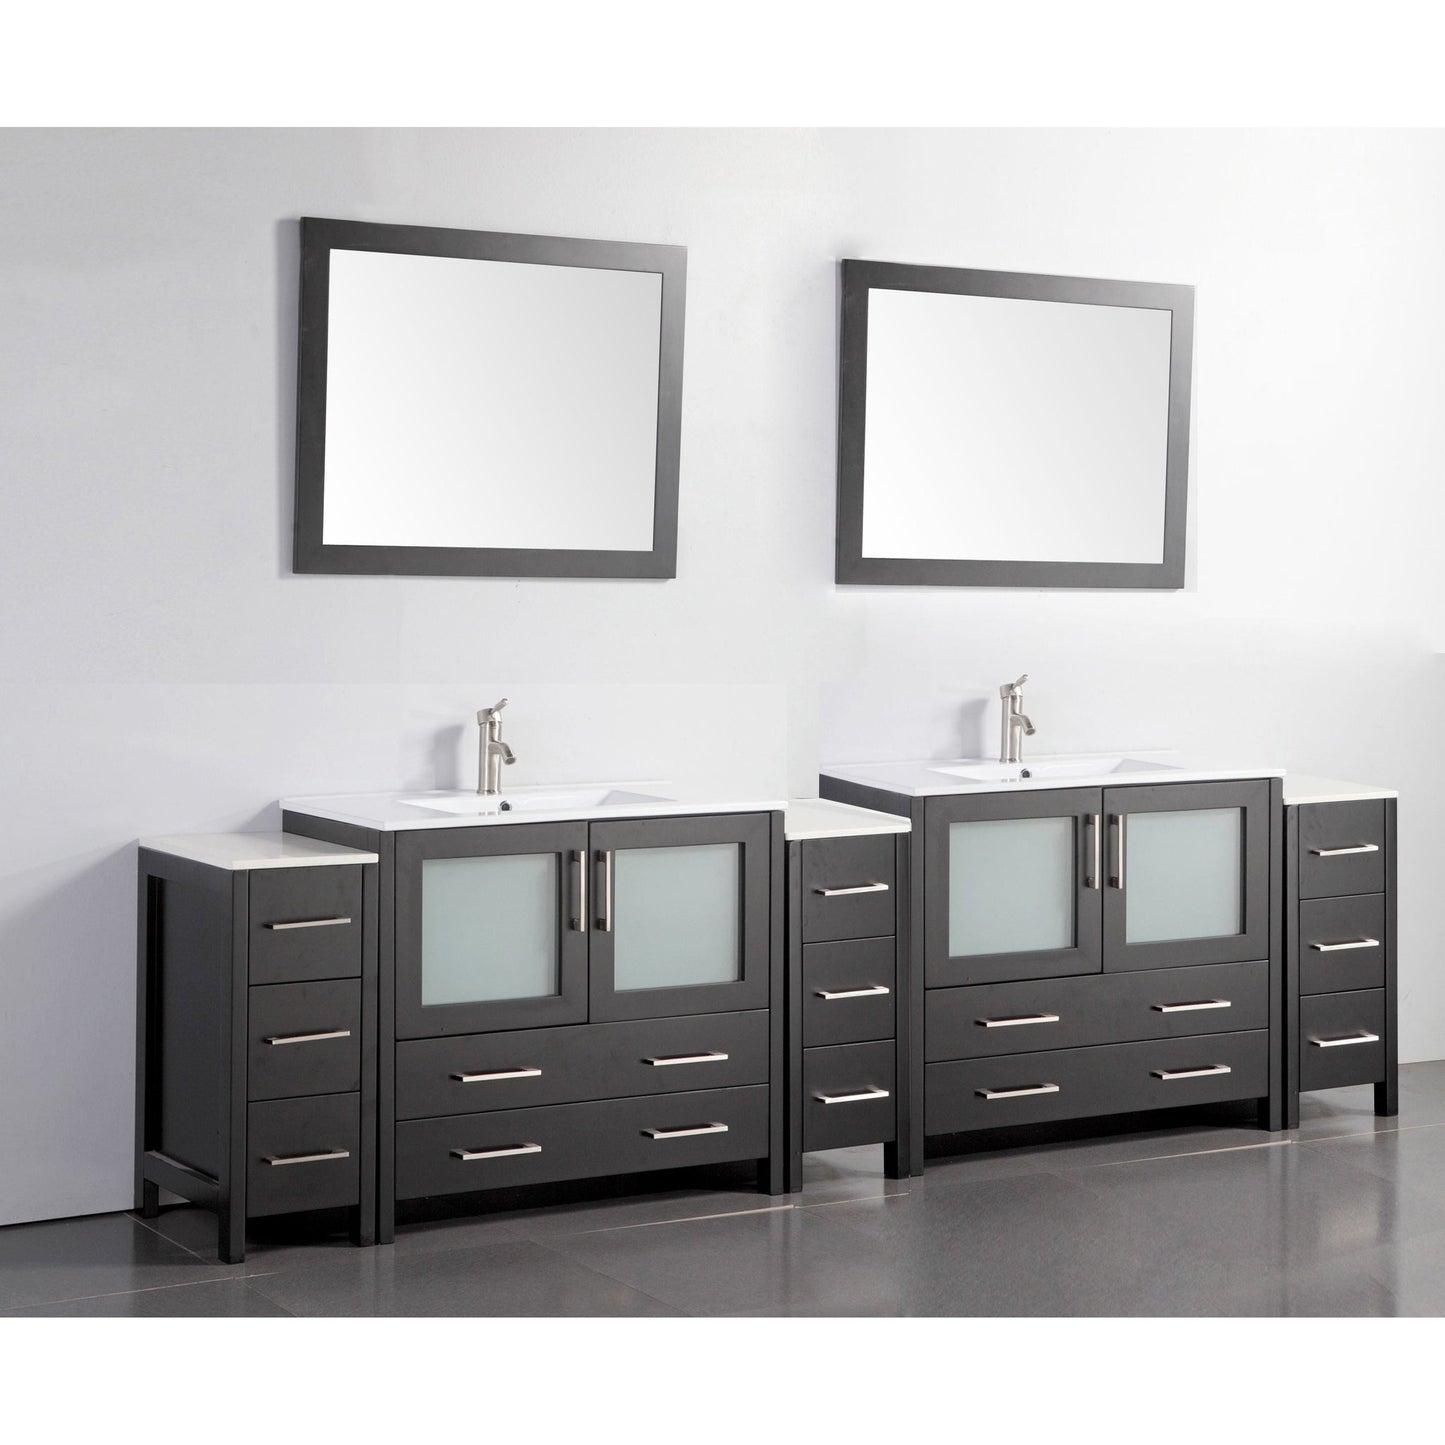 Vanity Art Brescia 108" Double Espresso Freestanding Modern Bathroom Vanity Set With Integrated Ceramic Sink, 2 Shelves, 13 Dovetail Drawers and 2 Mirrors